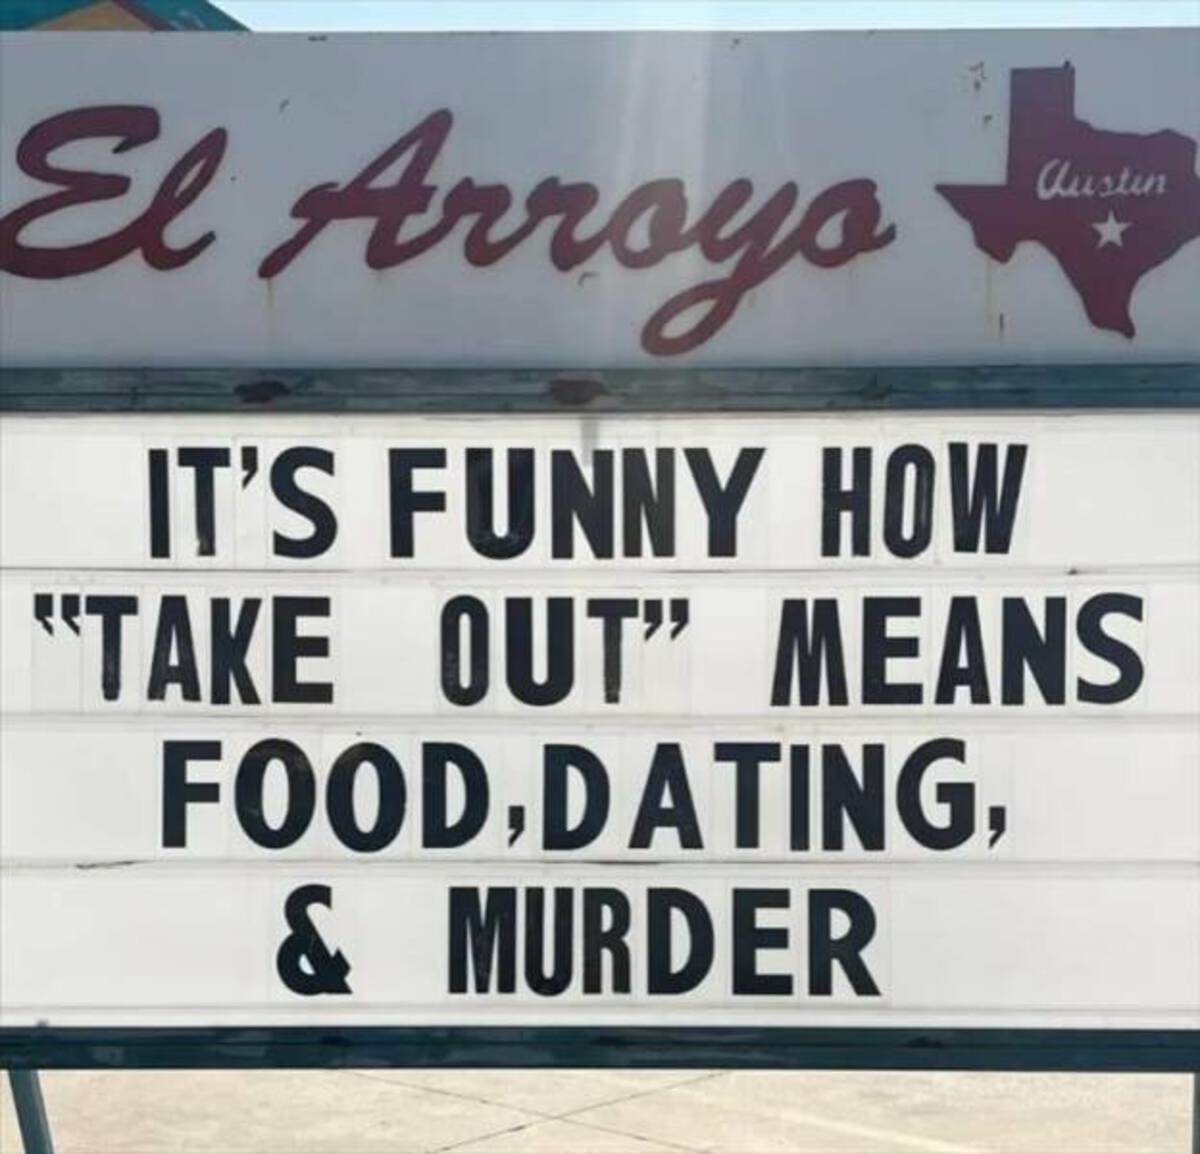 signage - El Arroyo Austin It'S Funny How "Take Out" Means Food, Dating, & Murder